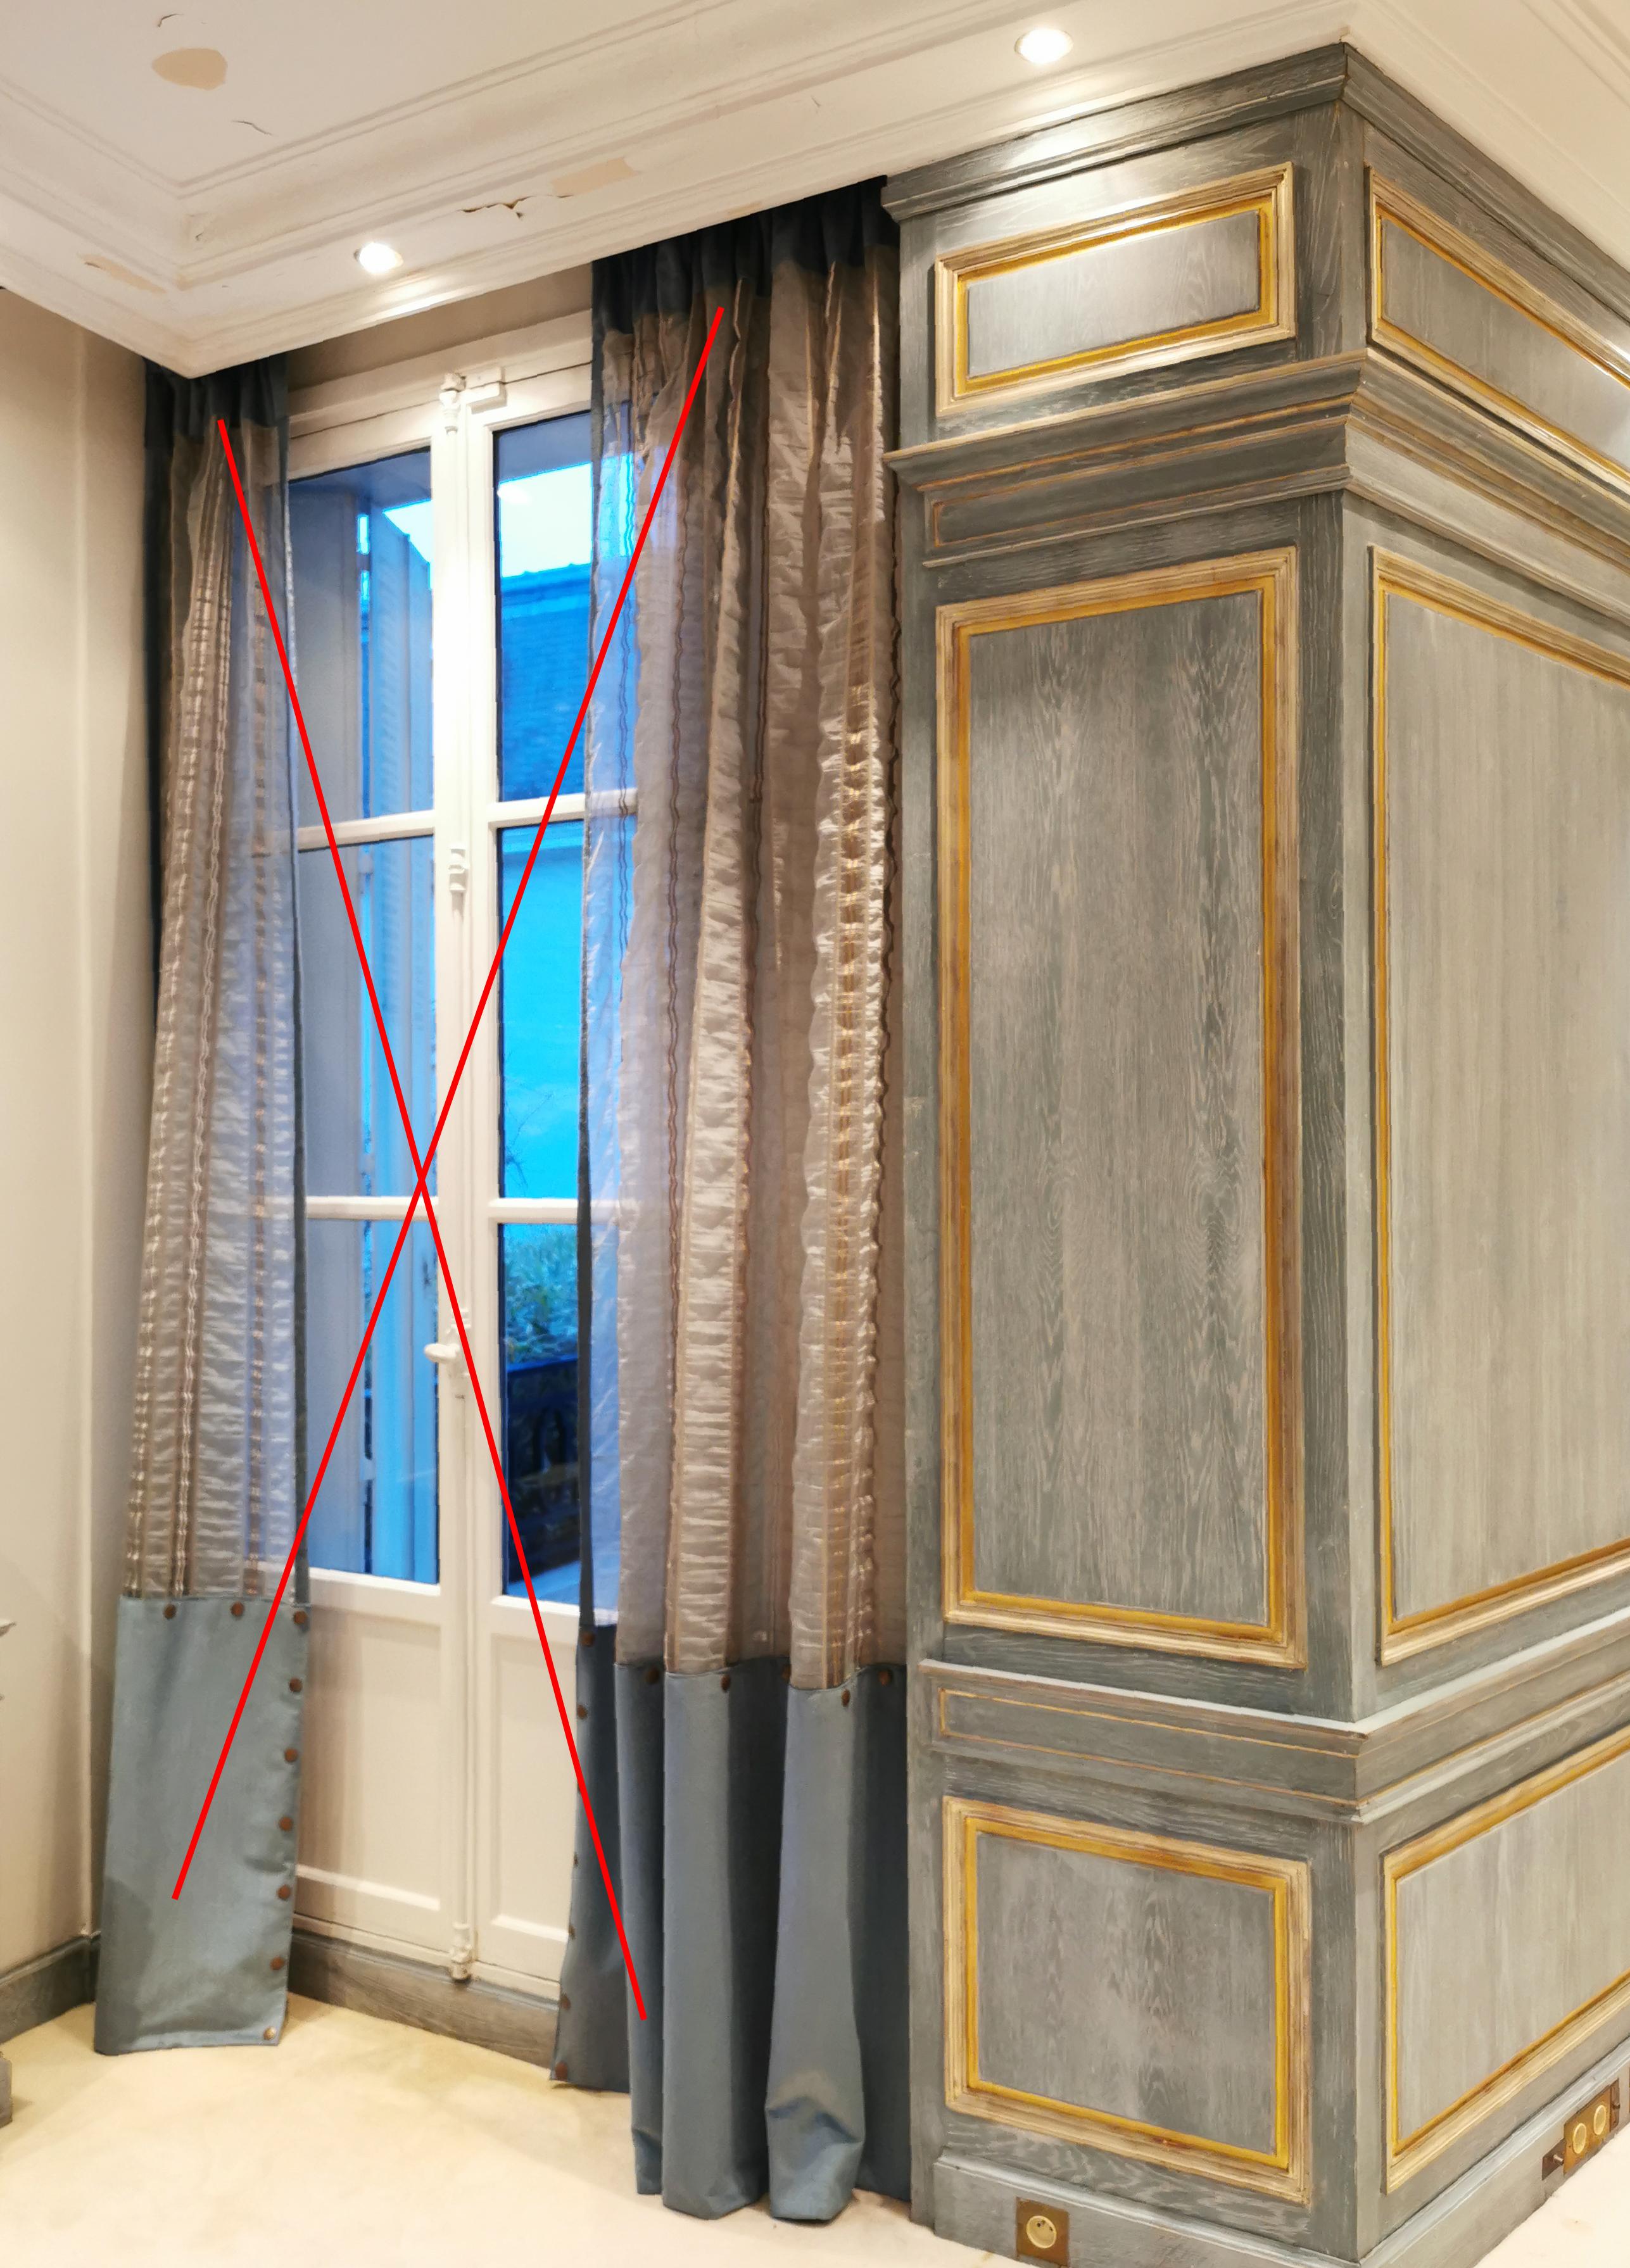 Wood Paneled Room with Trompe L'oeil Library Decoration, Late 20th Century For Sale 4